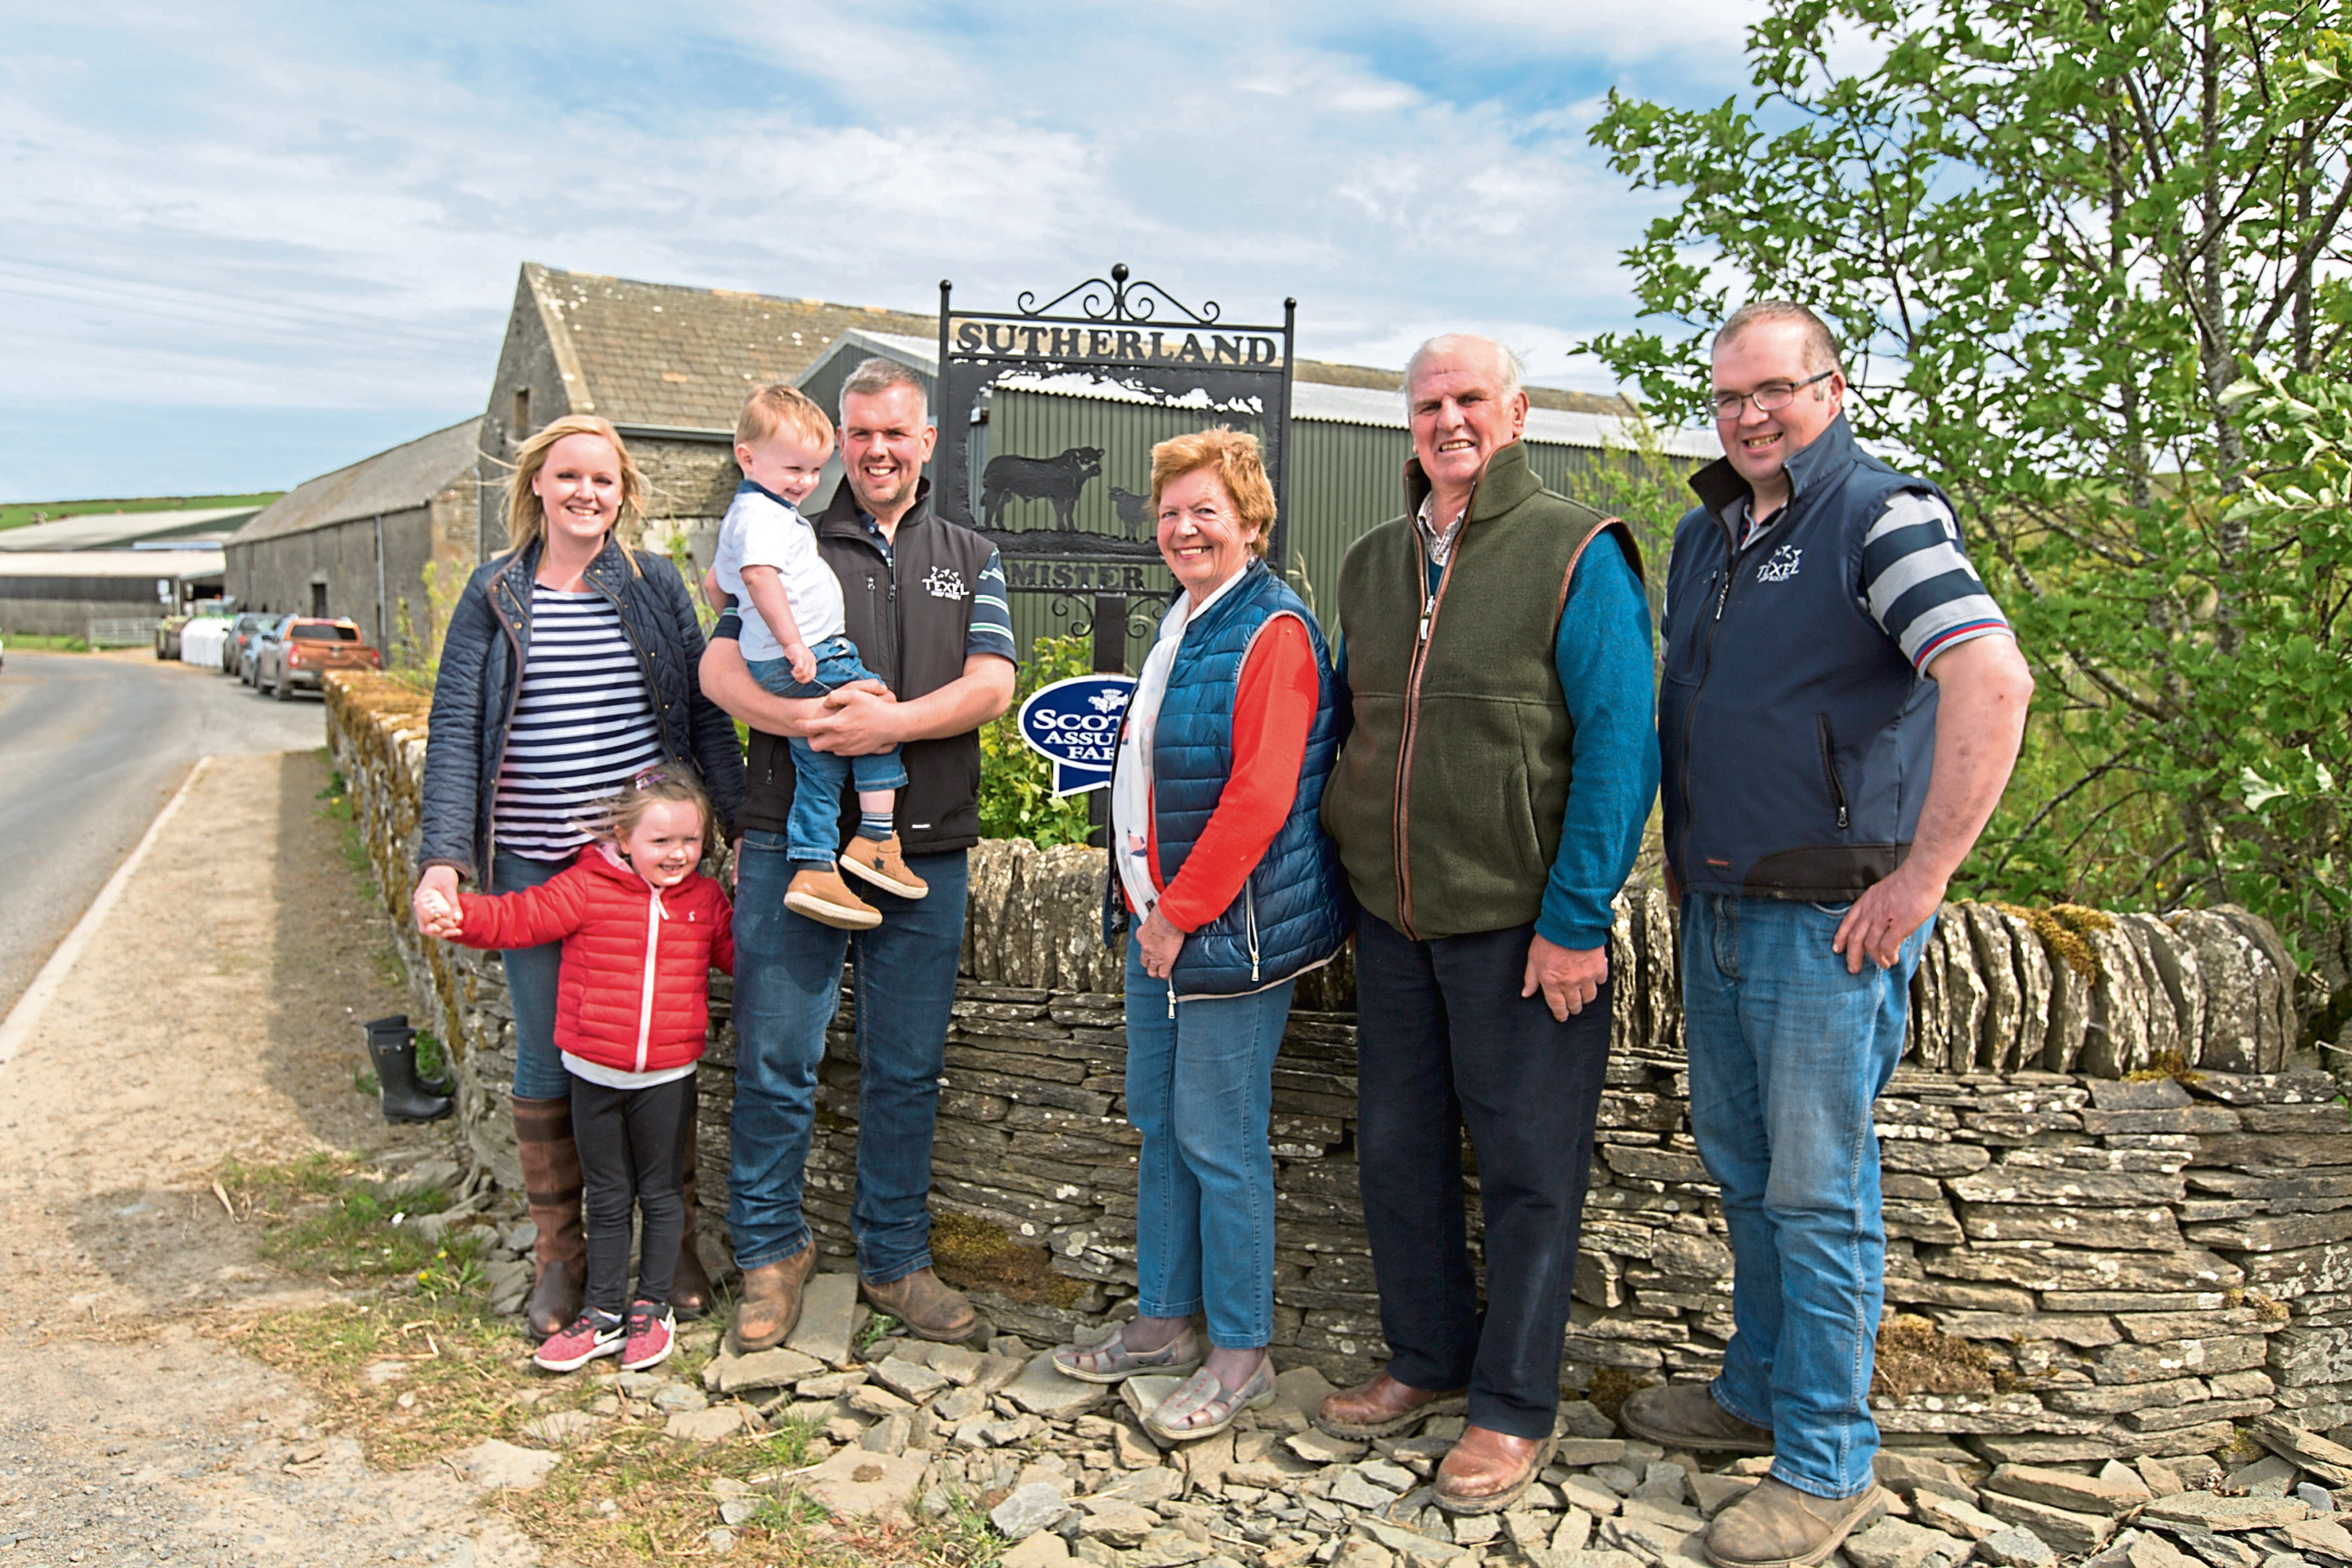 Kenneth Sutherland and wife Elspeth, are in the centre, son Stephen (right), son Kenneth to the left with his wife Fiona and children Jack and Amy.